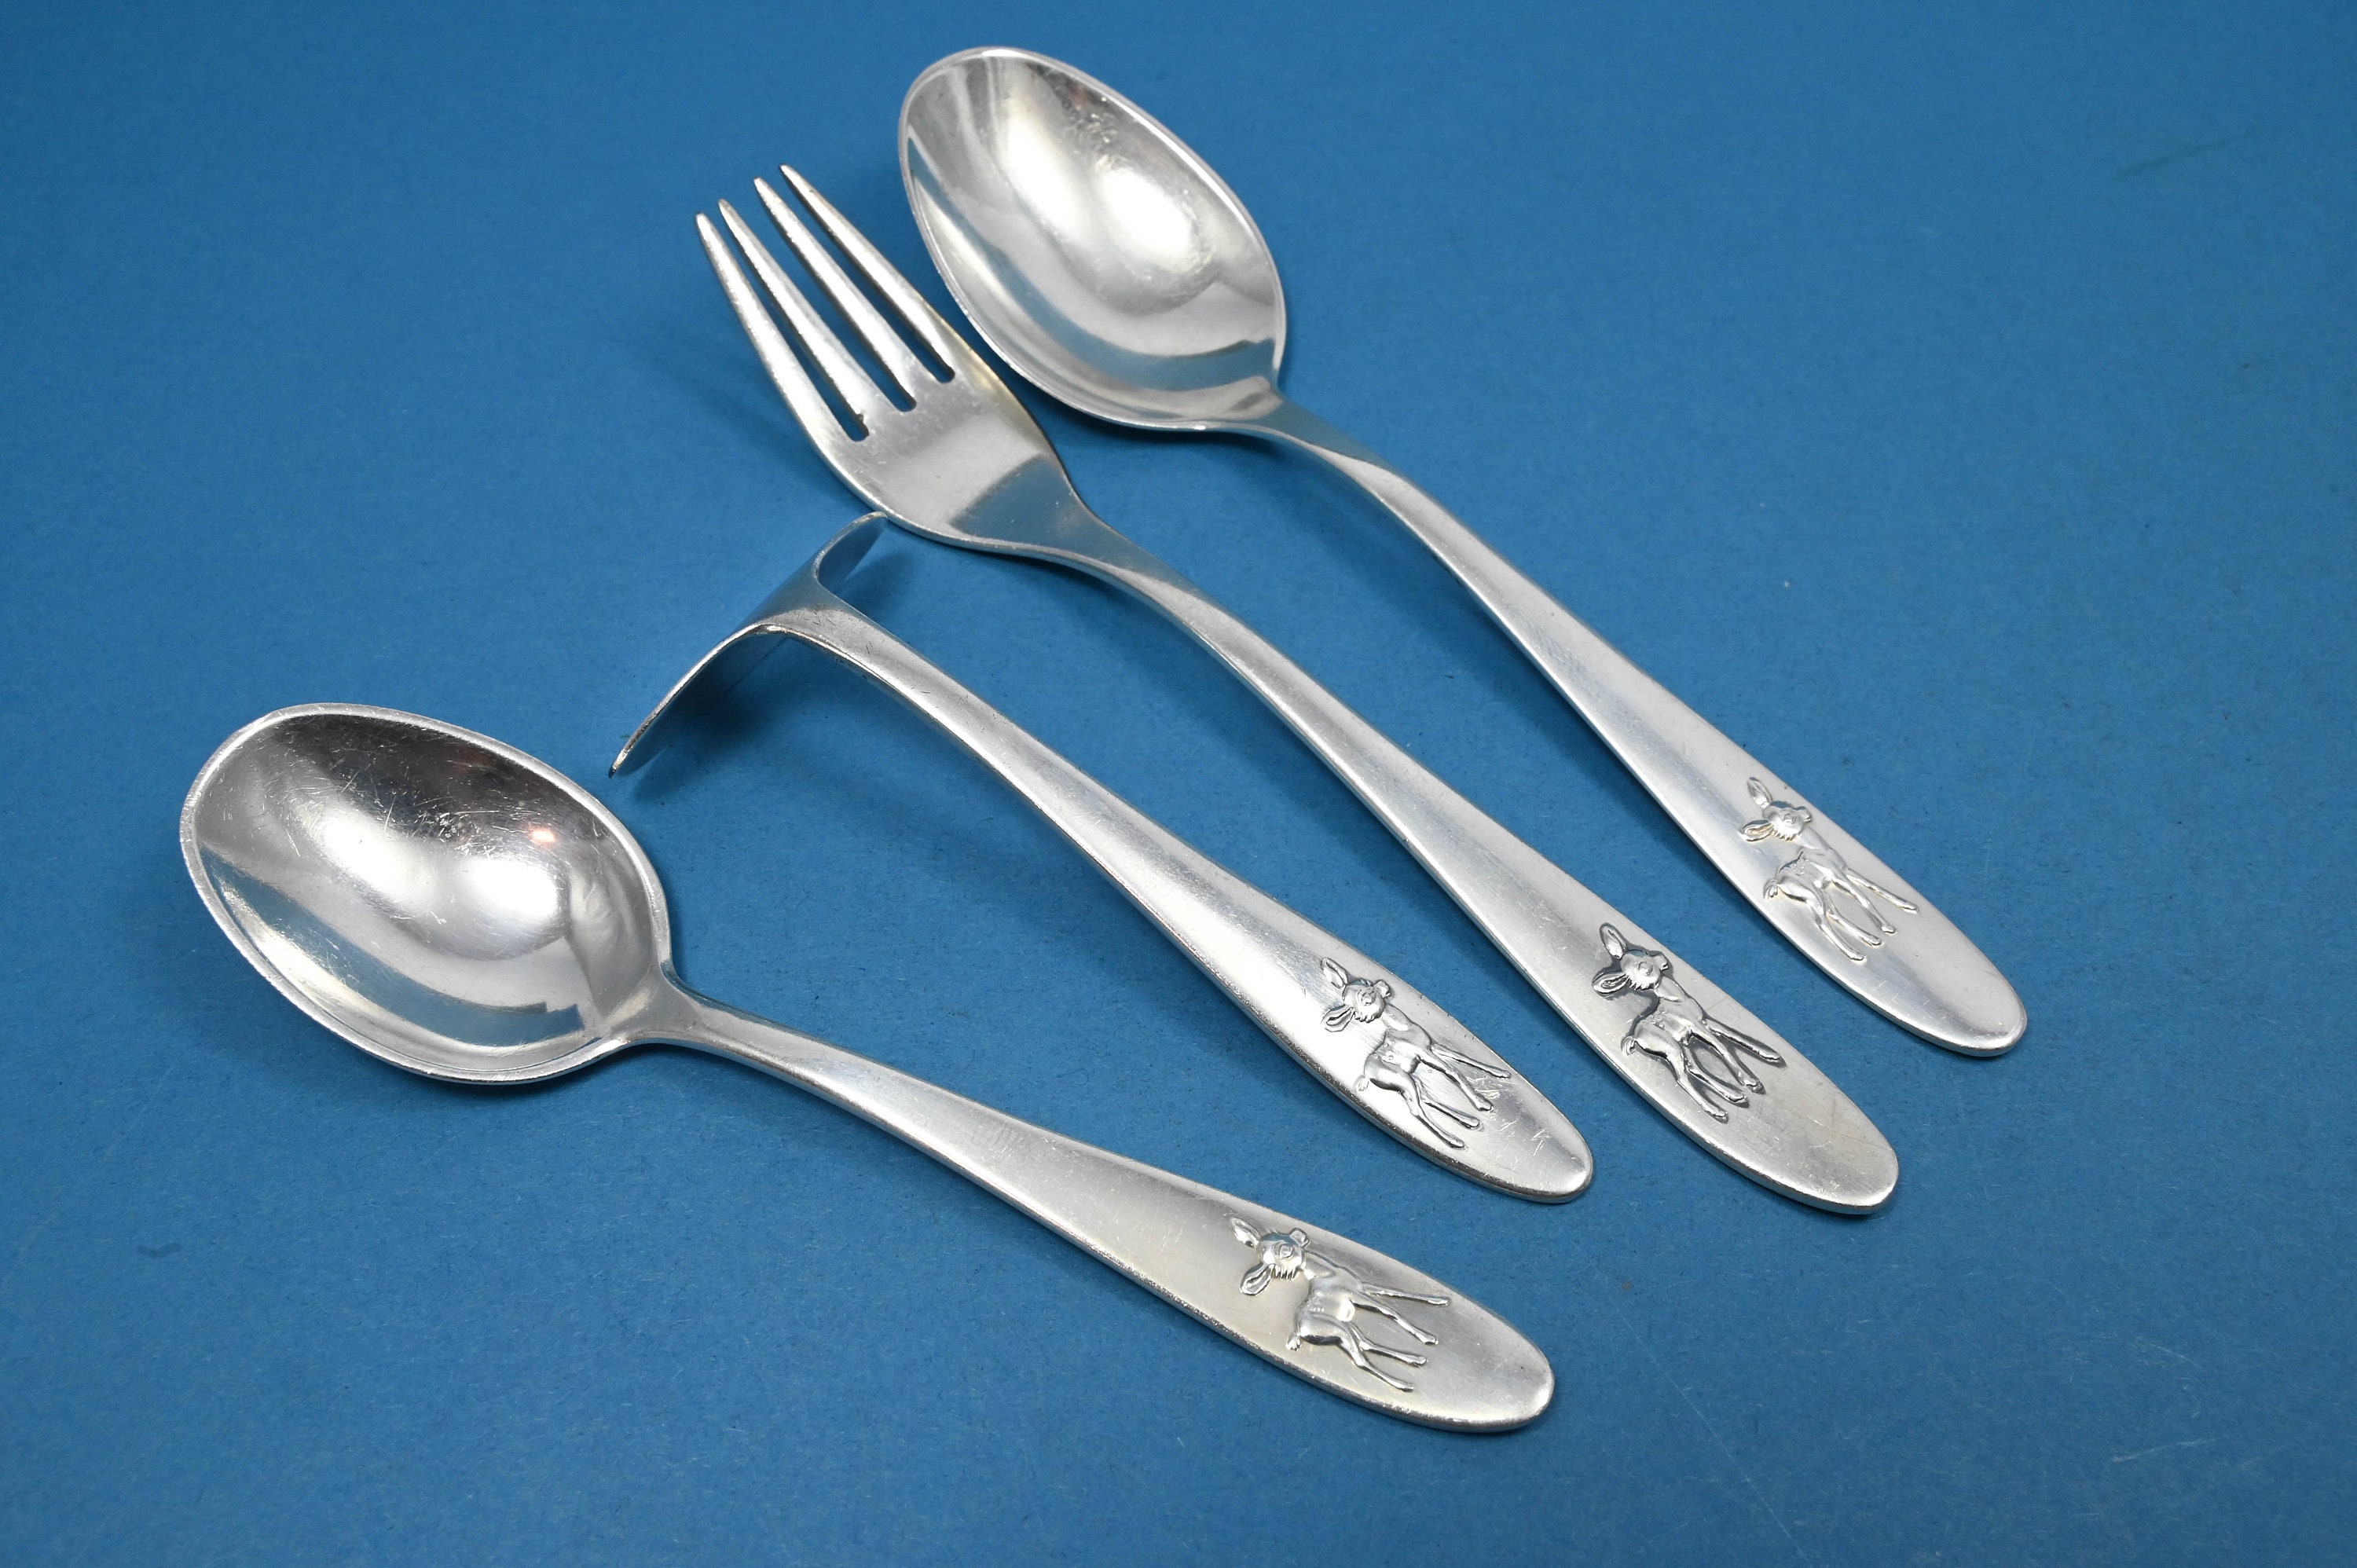 Buy Silver Cutlery for Home & Kitchen by Amefa Online